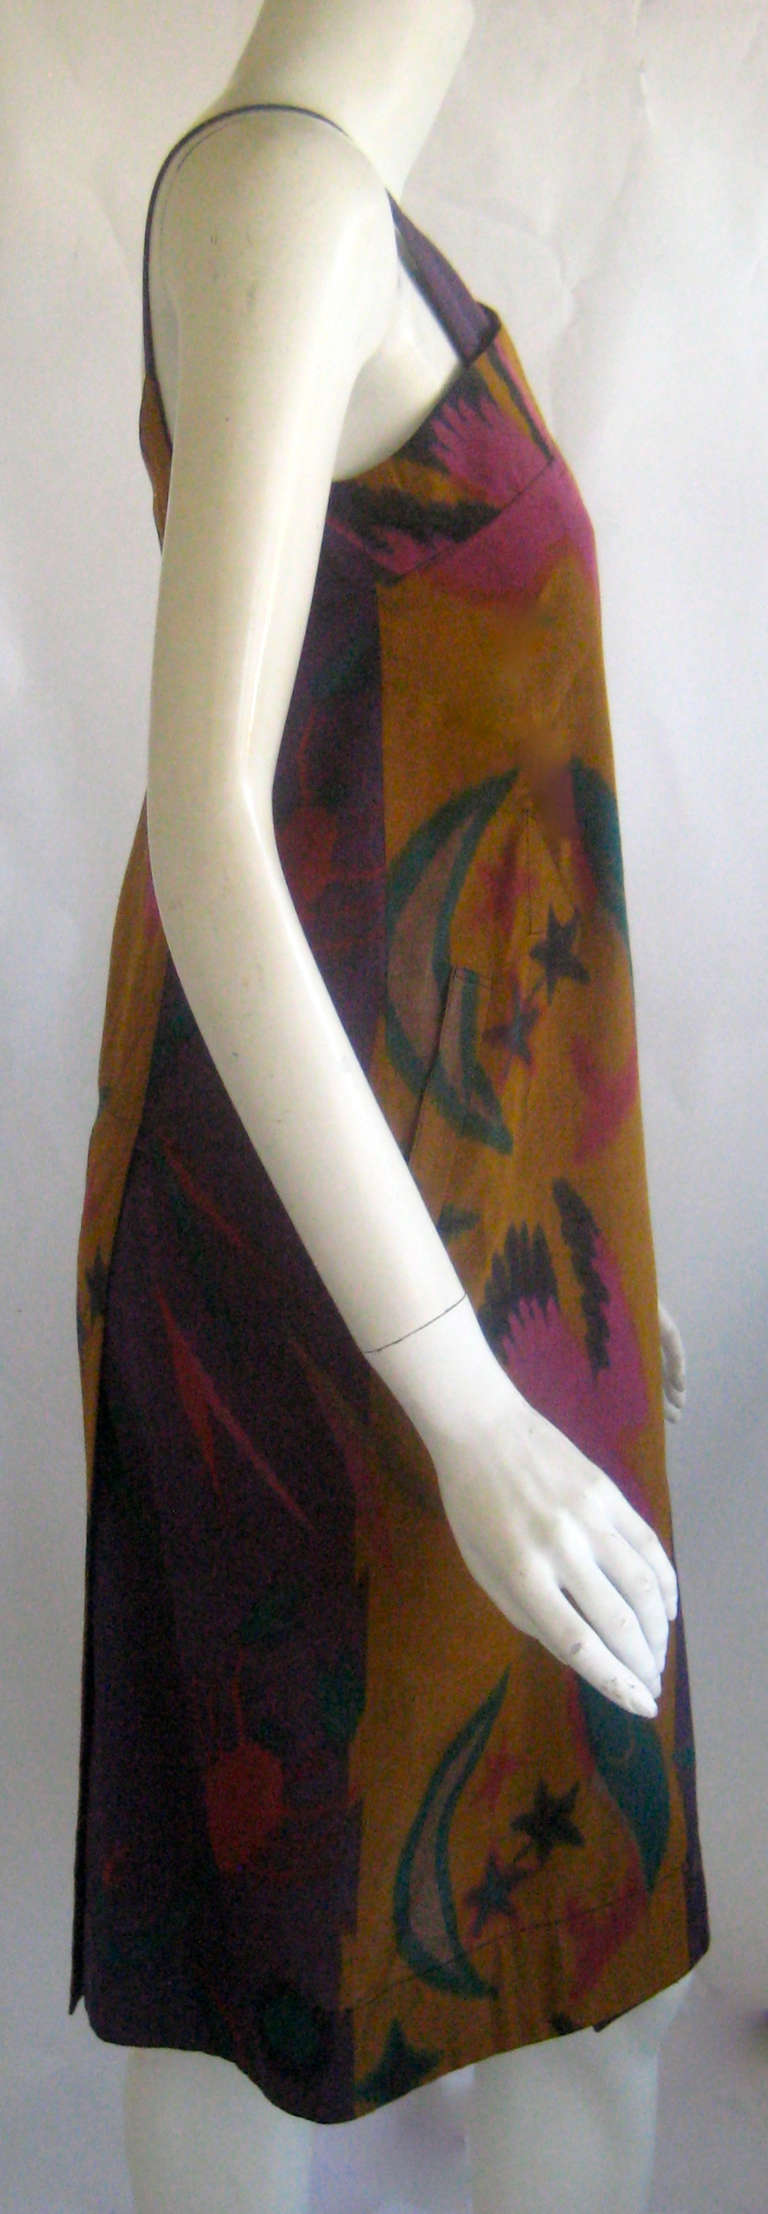 Women's 1979 Issey Miyake Cotton Wrap Dress For Sale